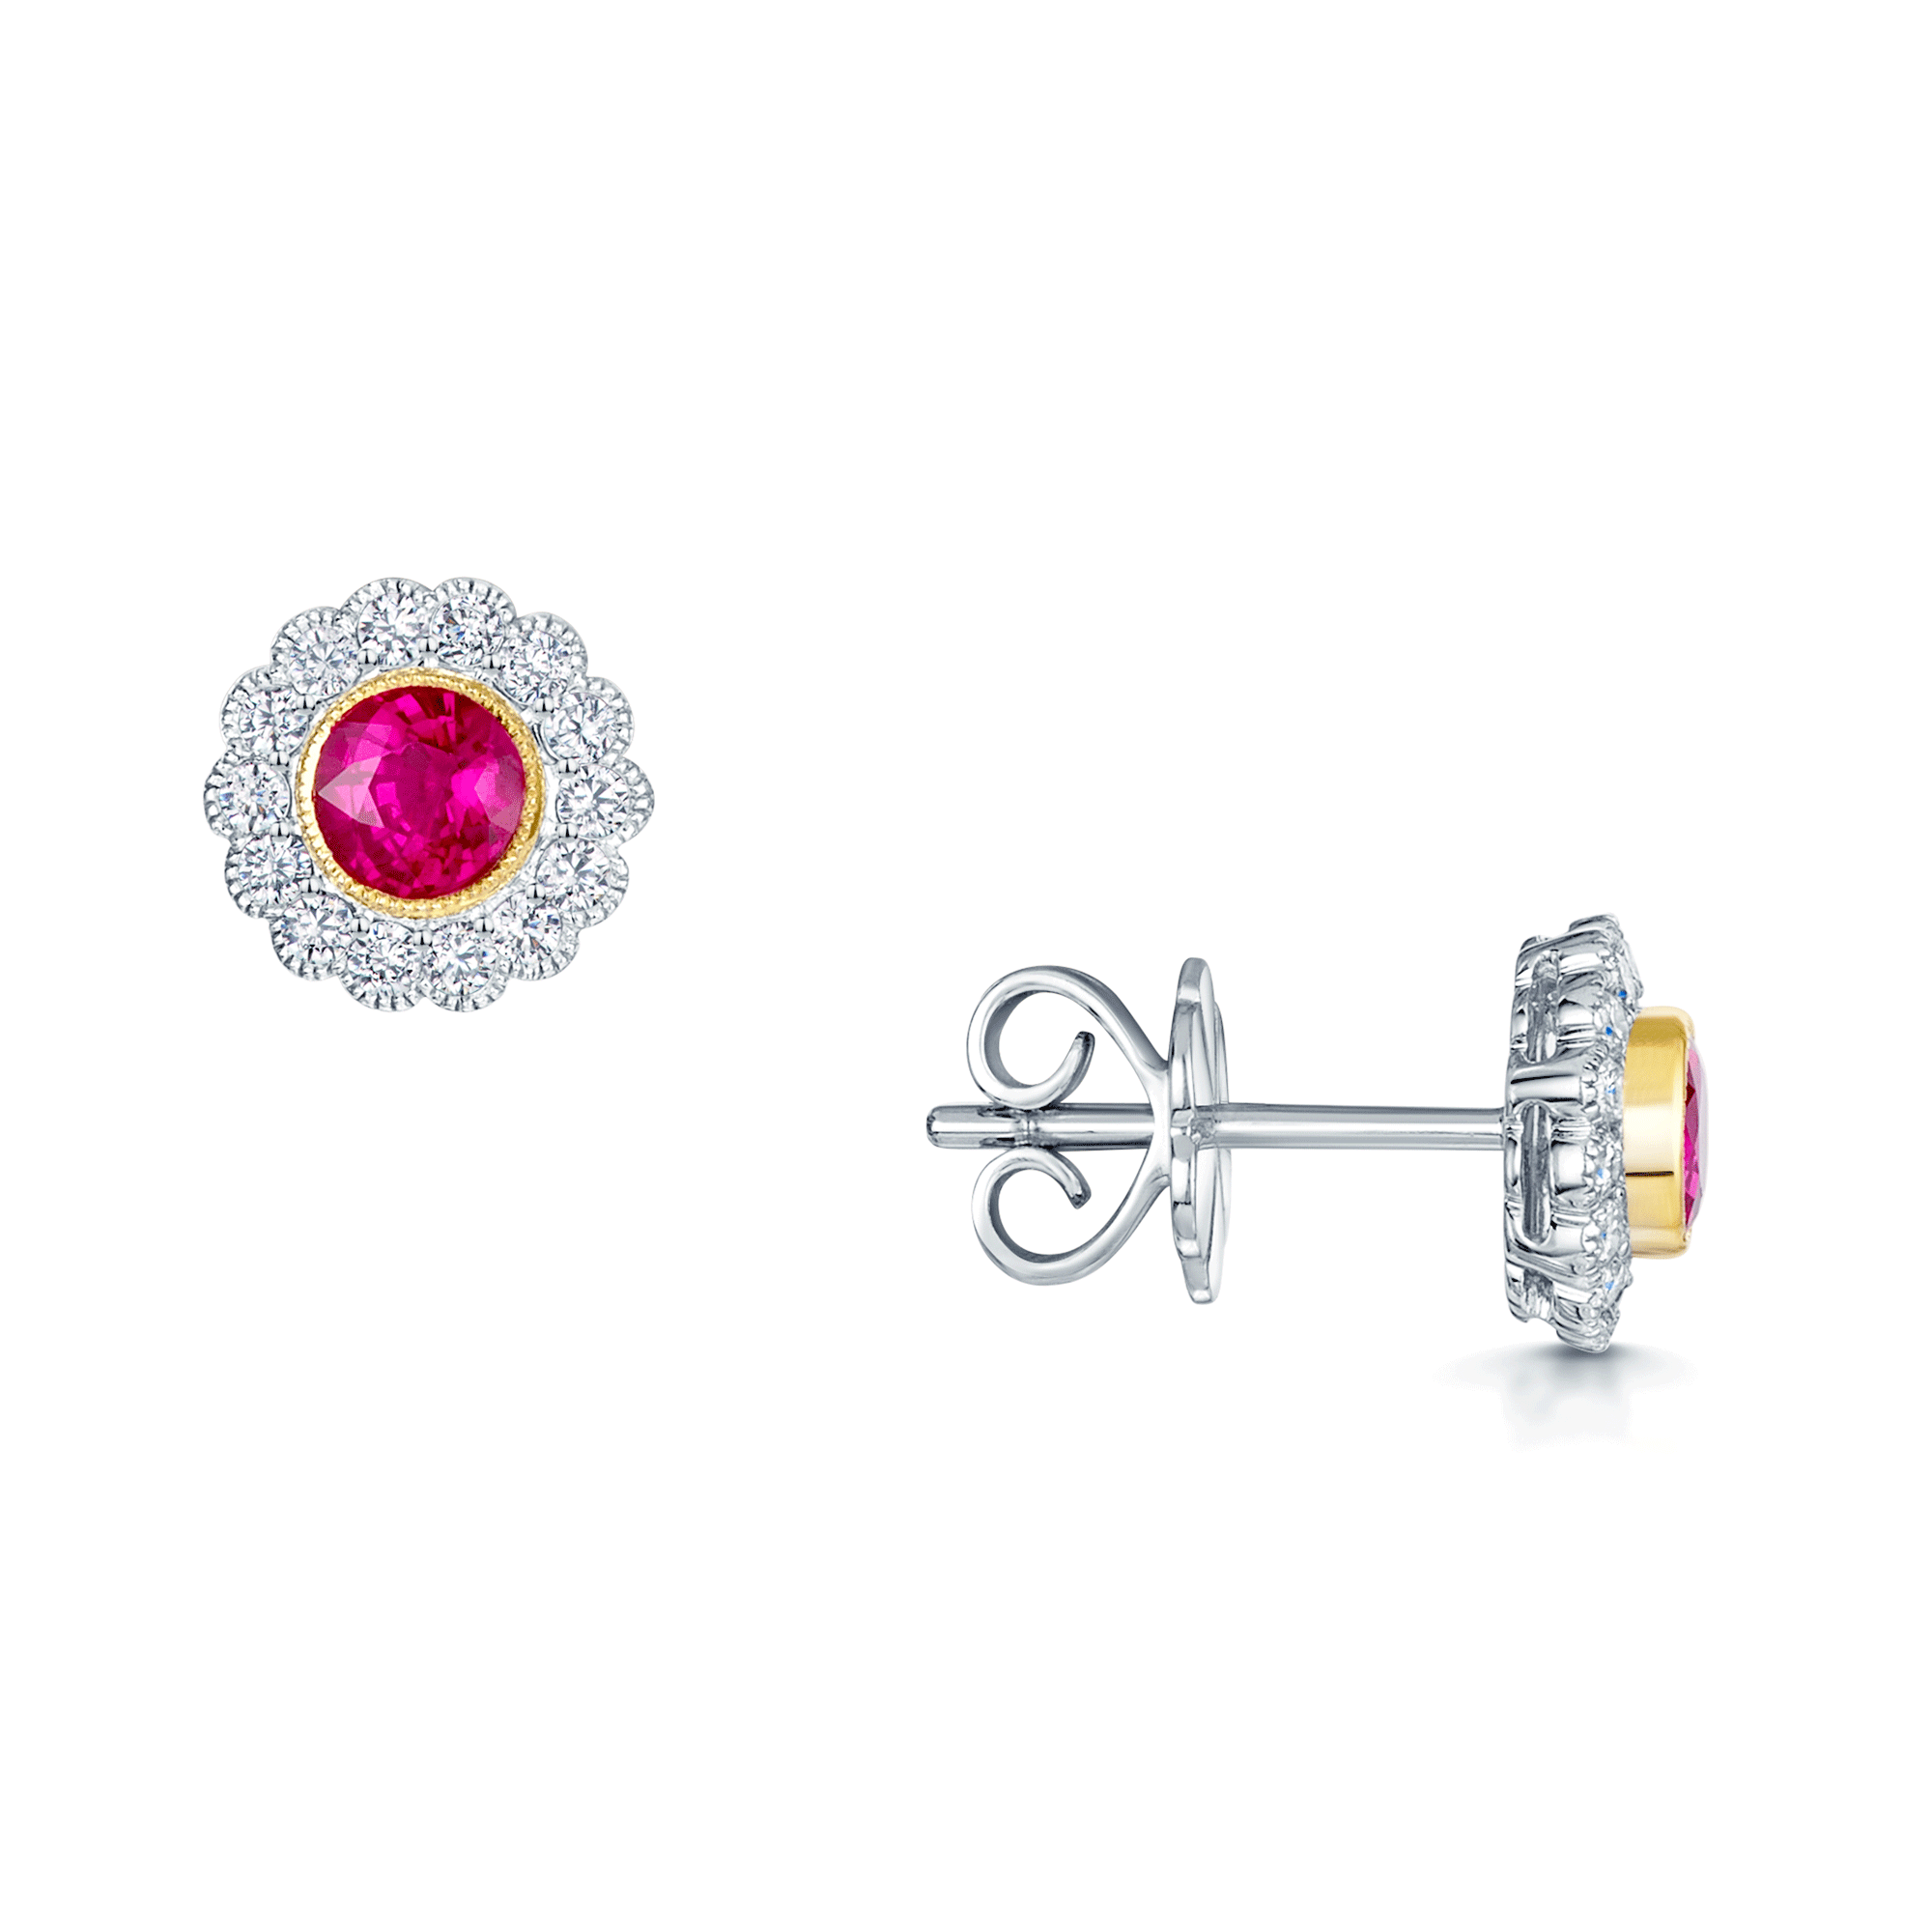 18ct Yellow And White Gold Ruby And Diamond Cluster Earrings